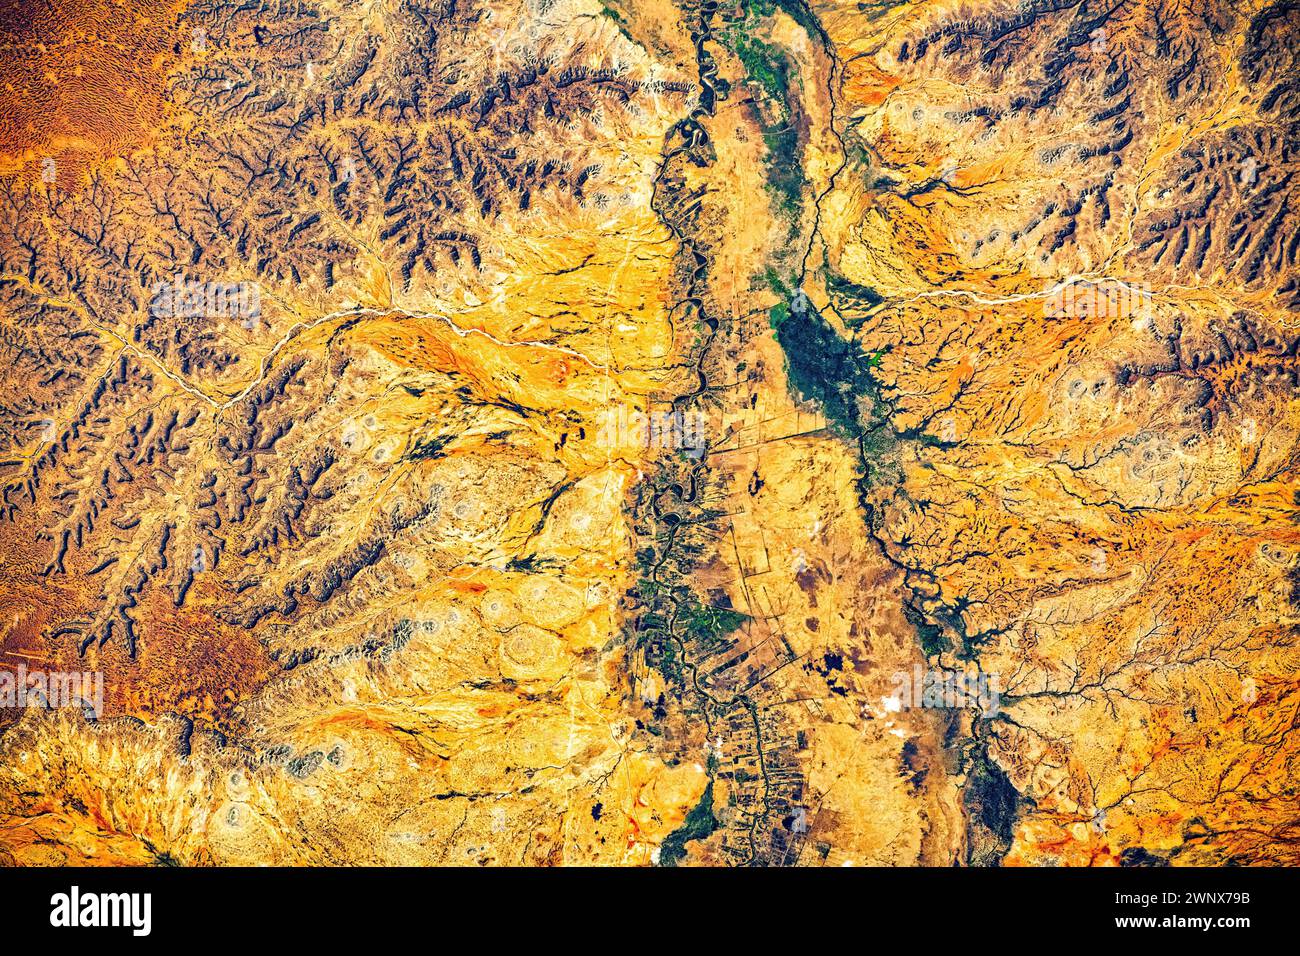 land close to Mustakhil, Ethiopia. Digital enhancement of an image by NASA Stock Photo